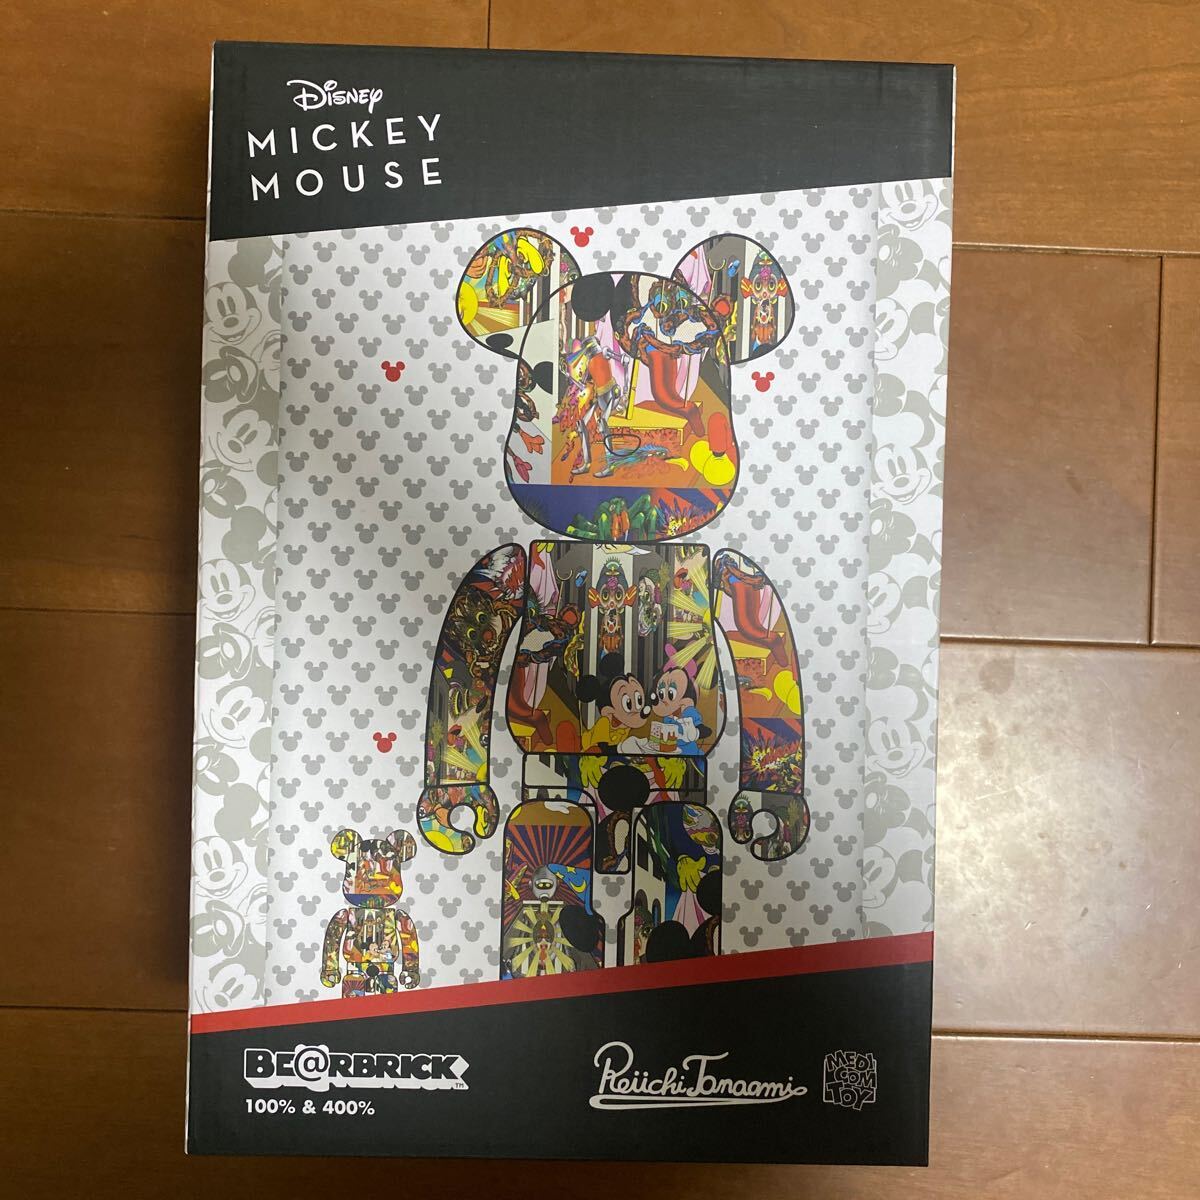 BE@RBRICK 田名網敬一 MICKEY MOUSE 100％ & 400％ ベアブリック ミッキーマウス_画像2